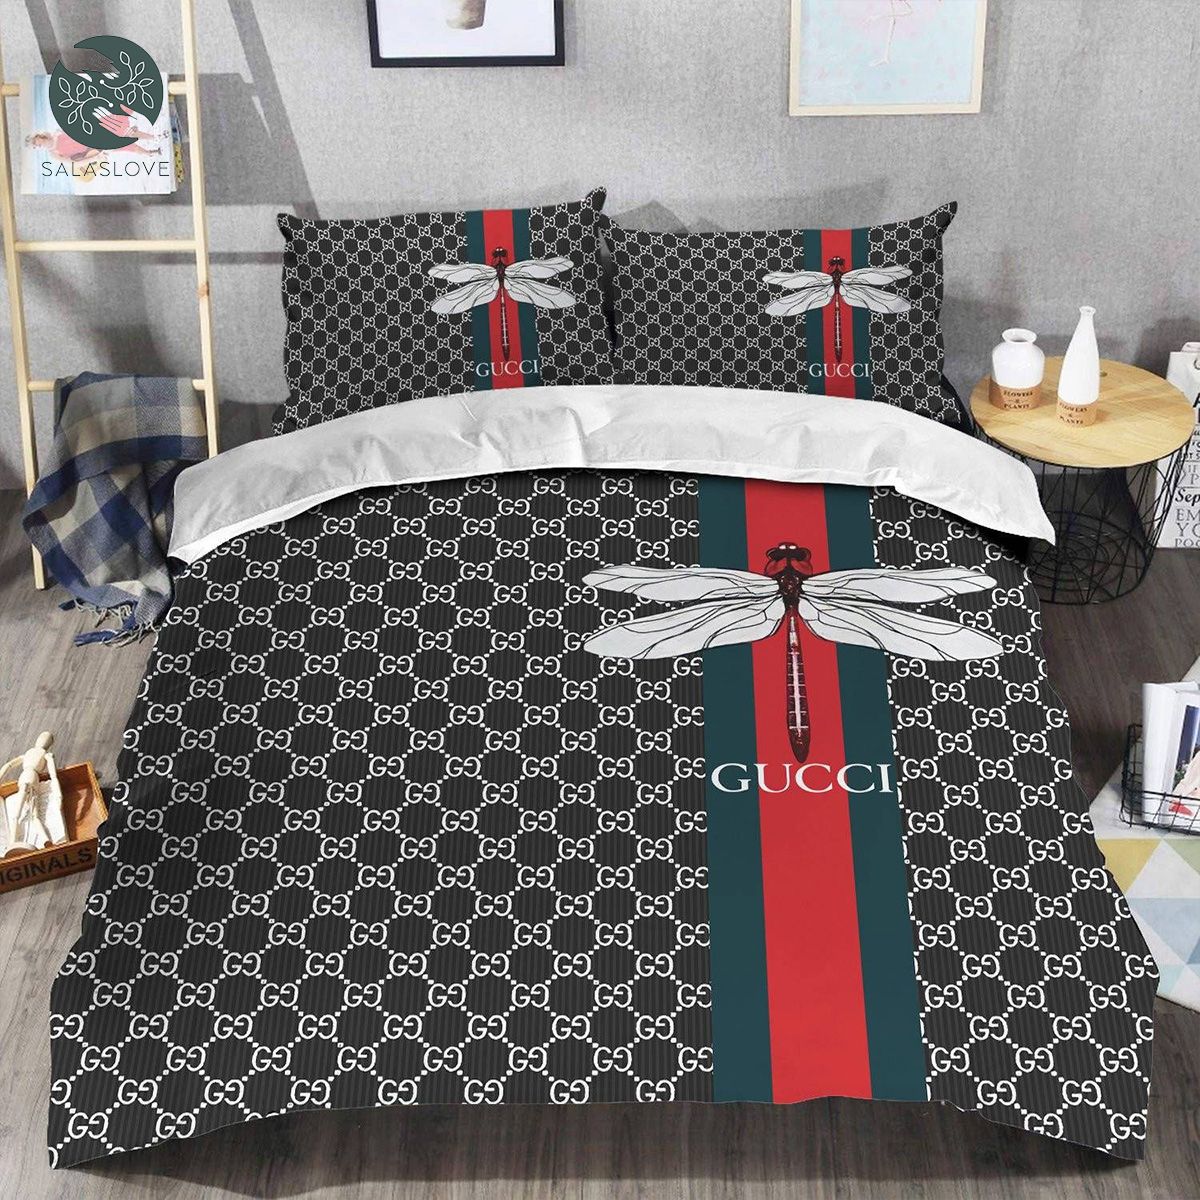 Gucci Dragonfly Luxury Brand Bedding Sets